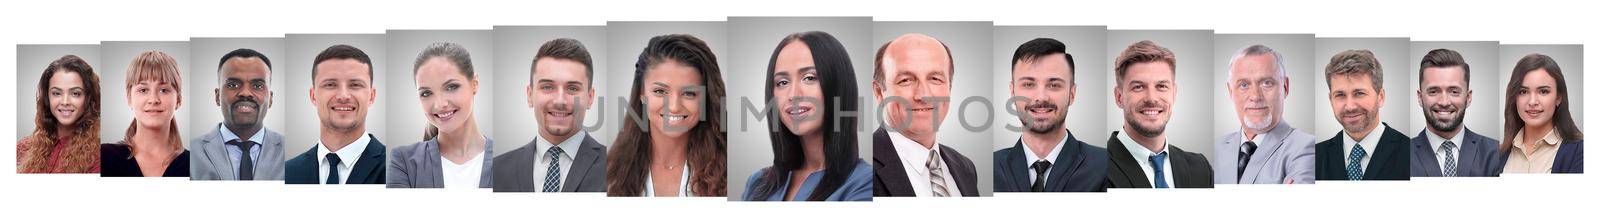 panoramic collage of portraits of successful employees by asdf